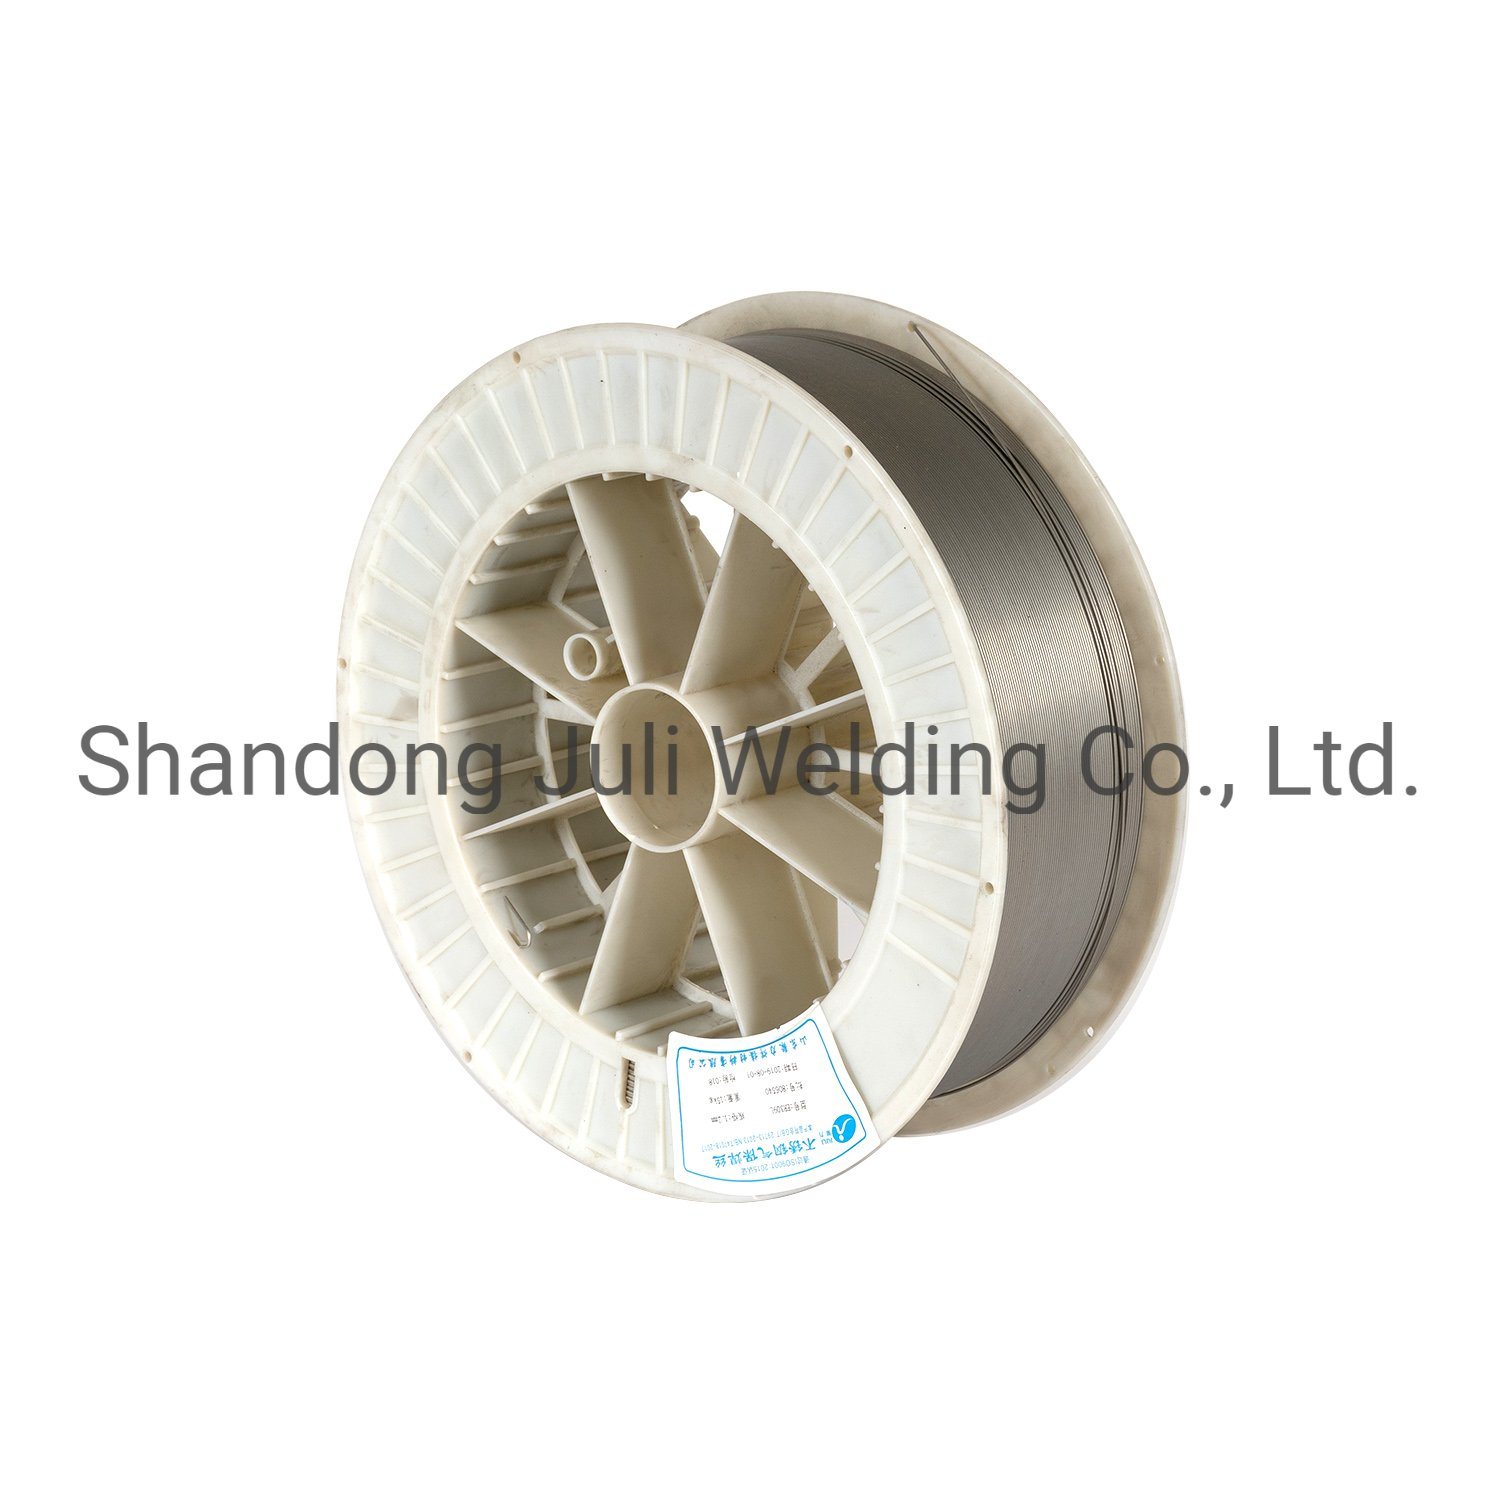 No 1 Exporter SS316 Stainless Steel Welding Wire